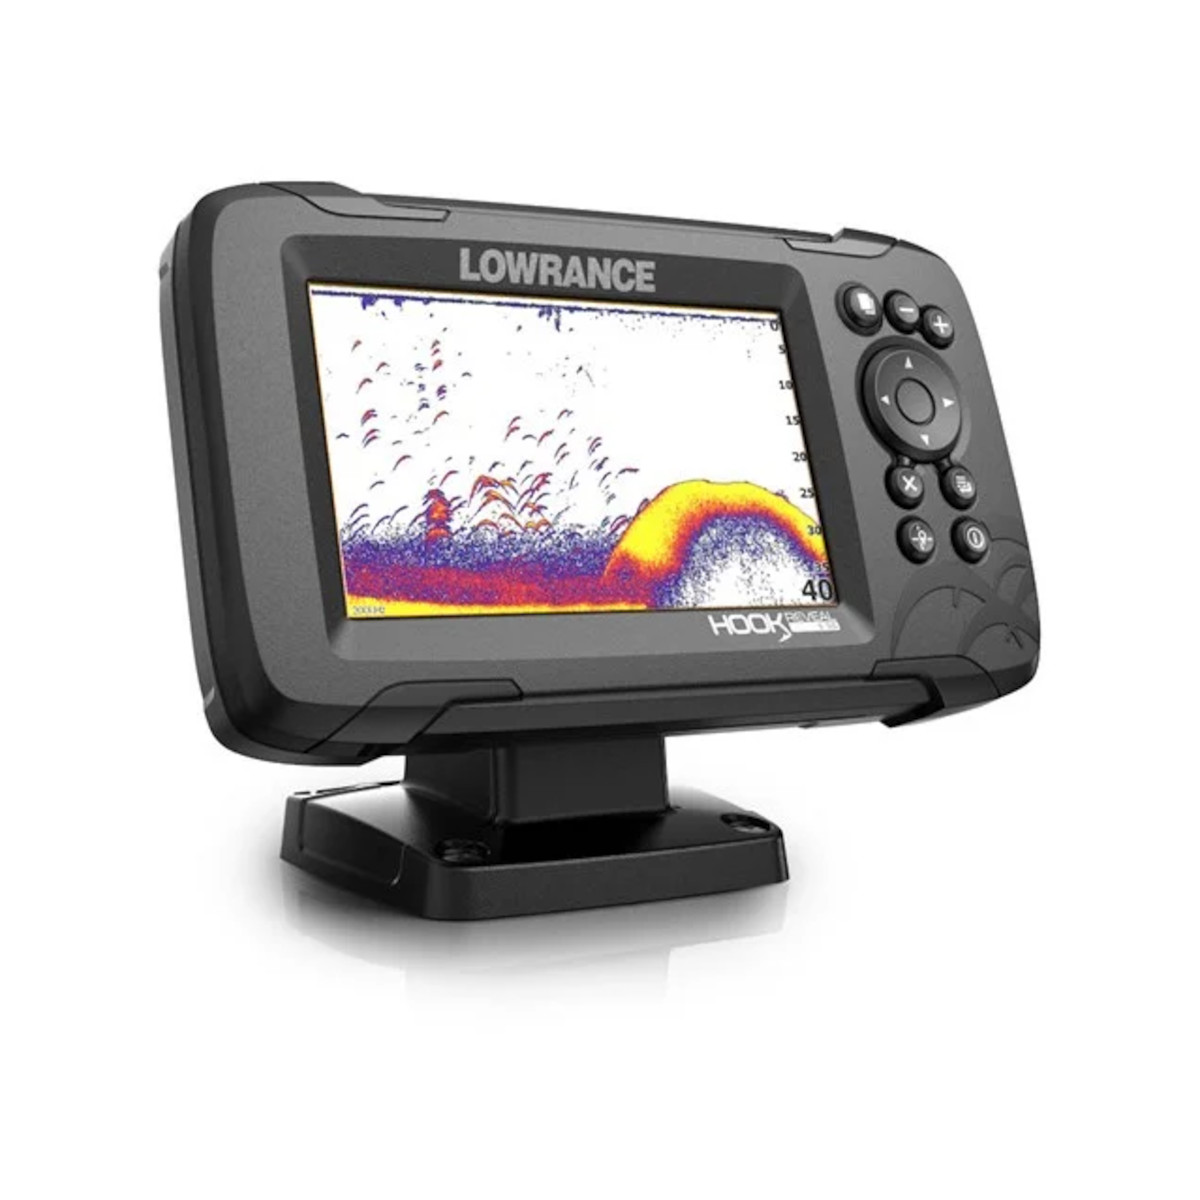 Lowrance HOOK Reveal 5 kaartplotter incl. 50/200 HDI transducer